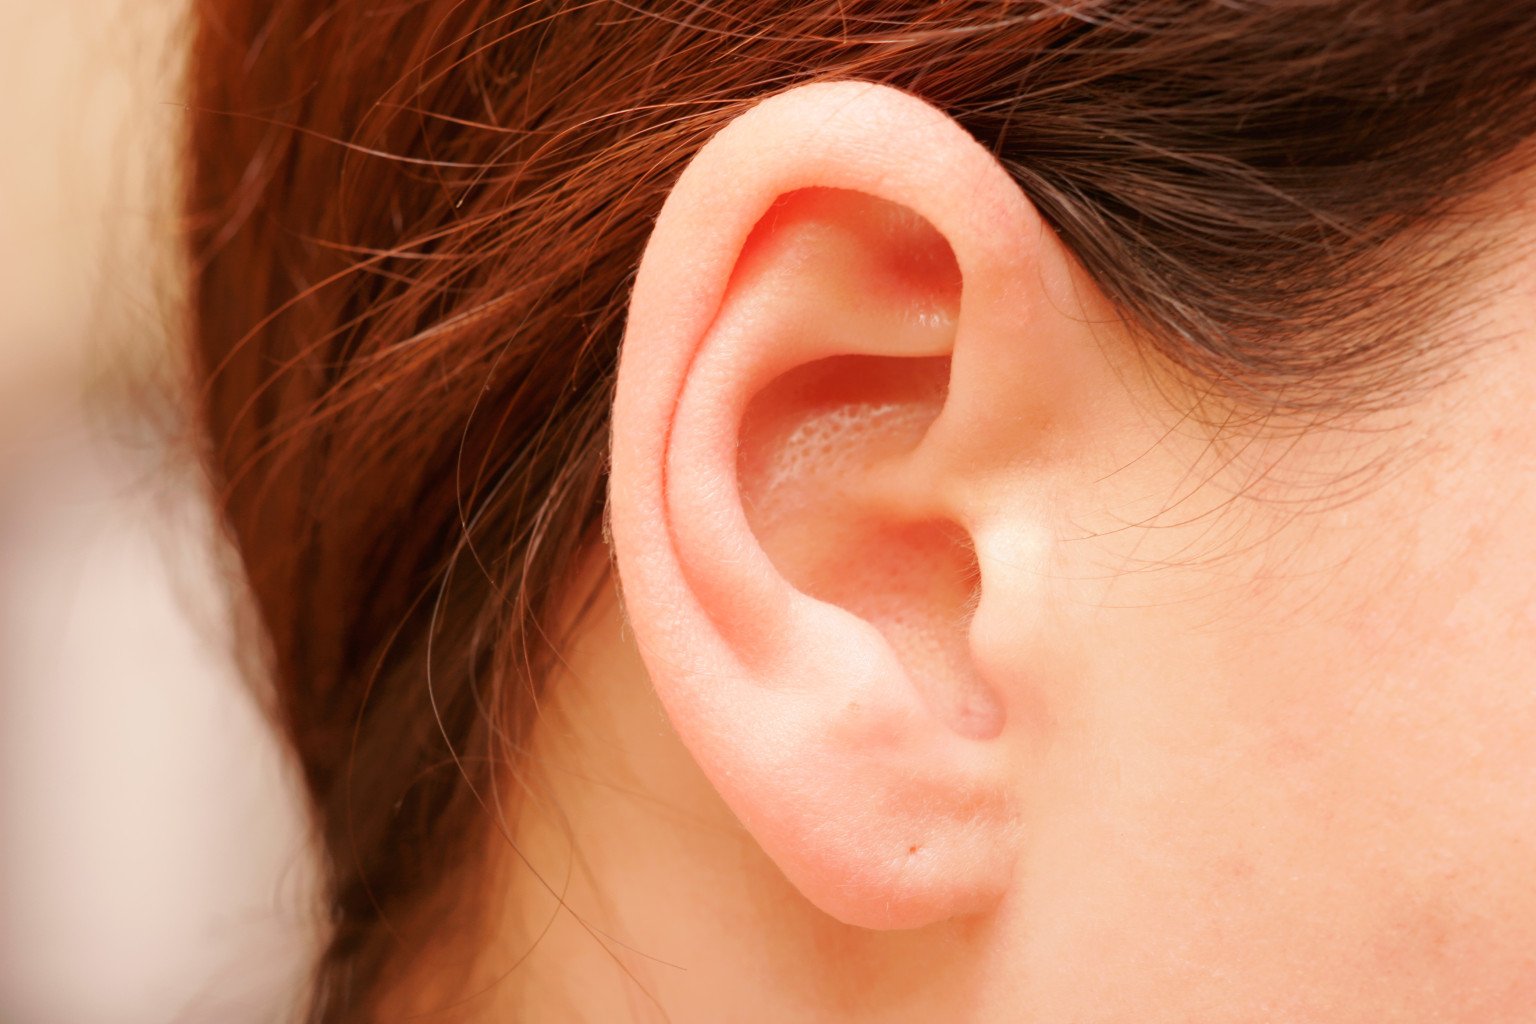 10 Common Noises That Can Cause Permanent Hearing Loss ...